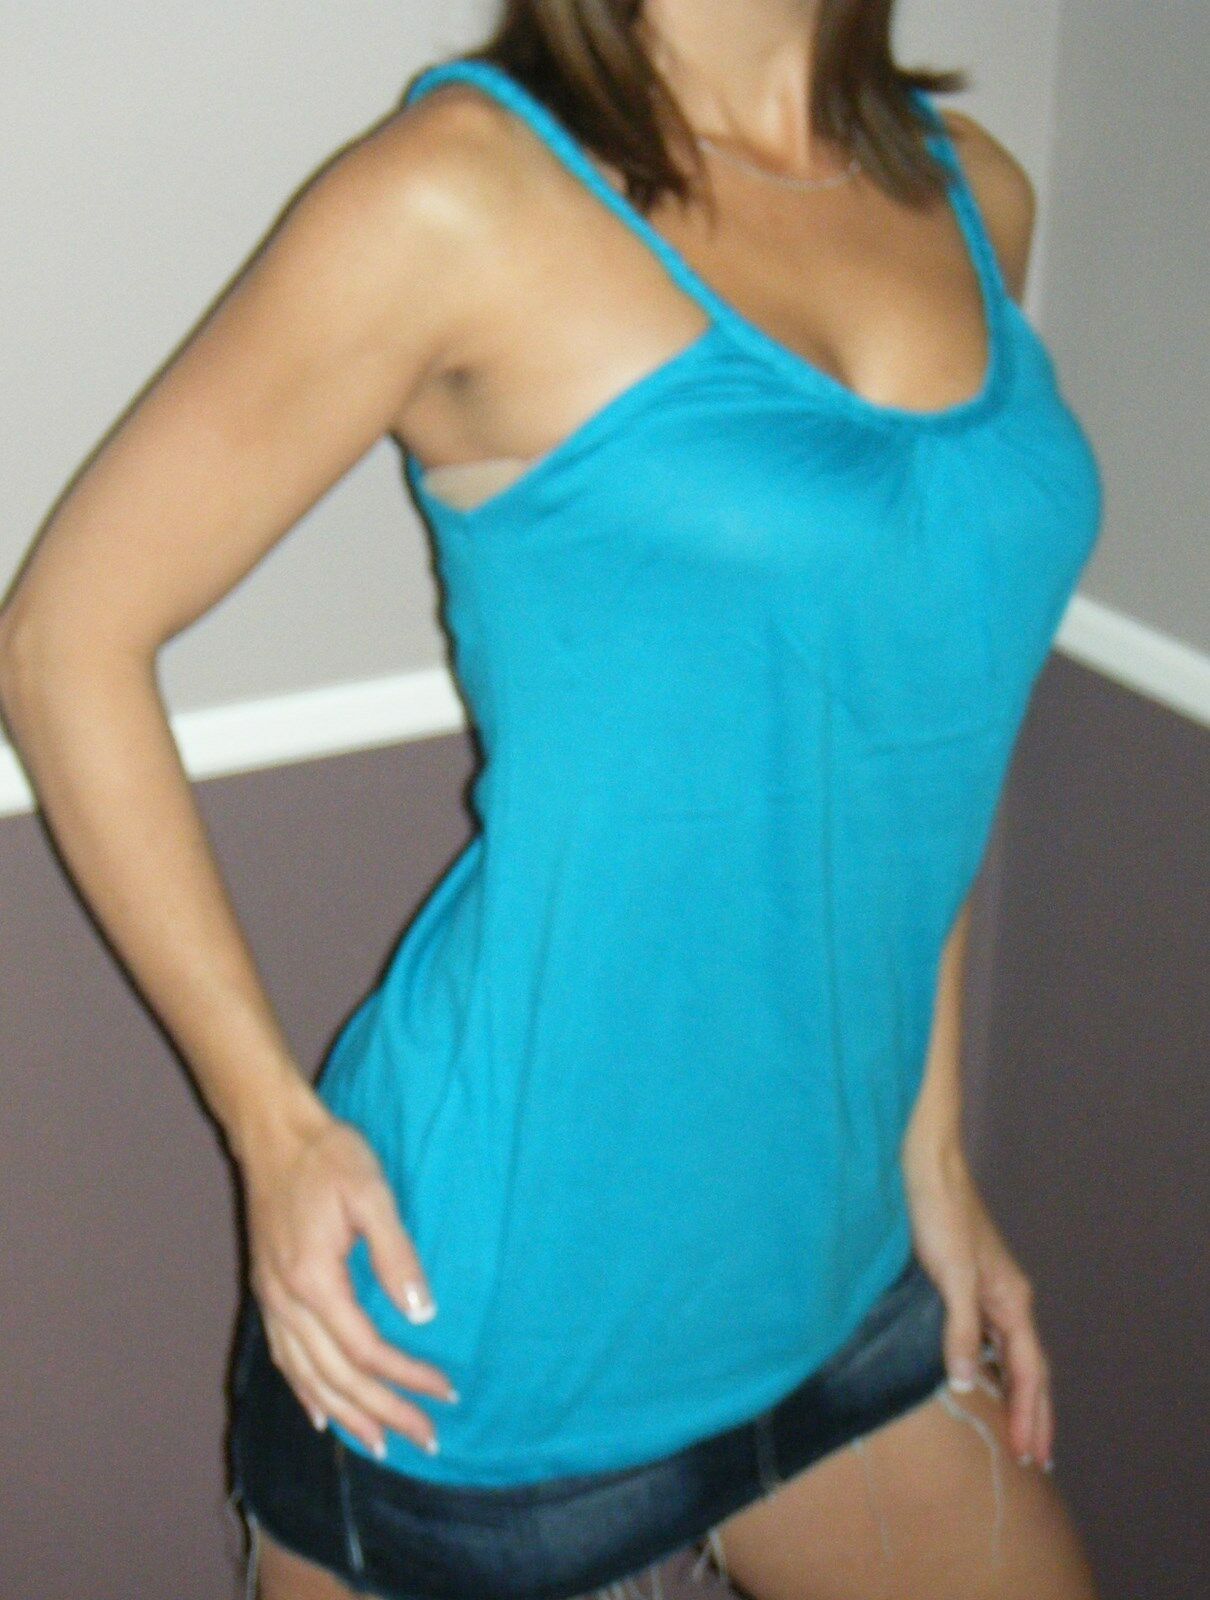 Sexy Low Cut Scoop Neck Braided Spaghetti Strap Tank Shirt Top Turquoise S/M/L